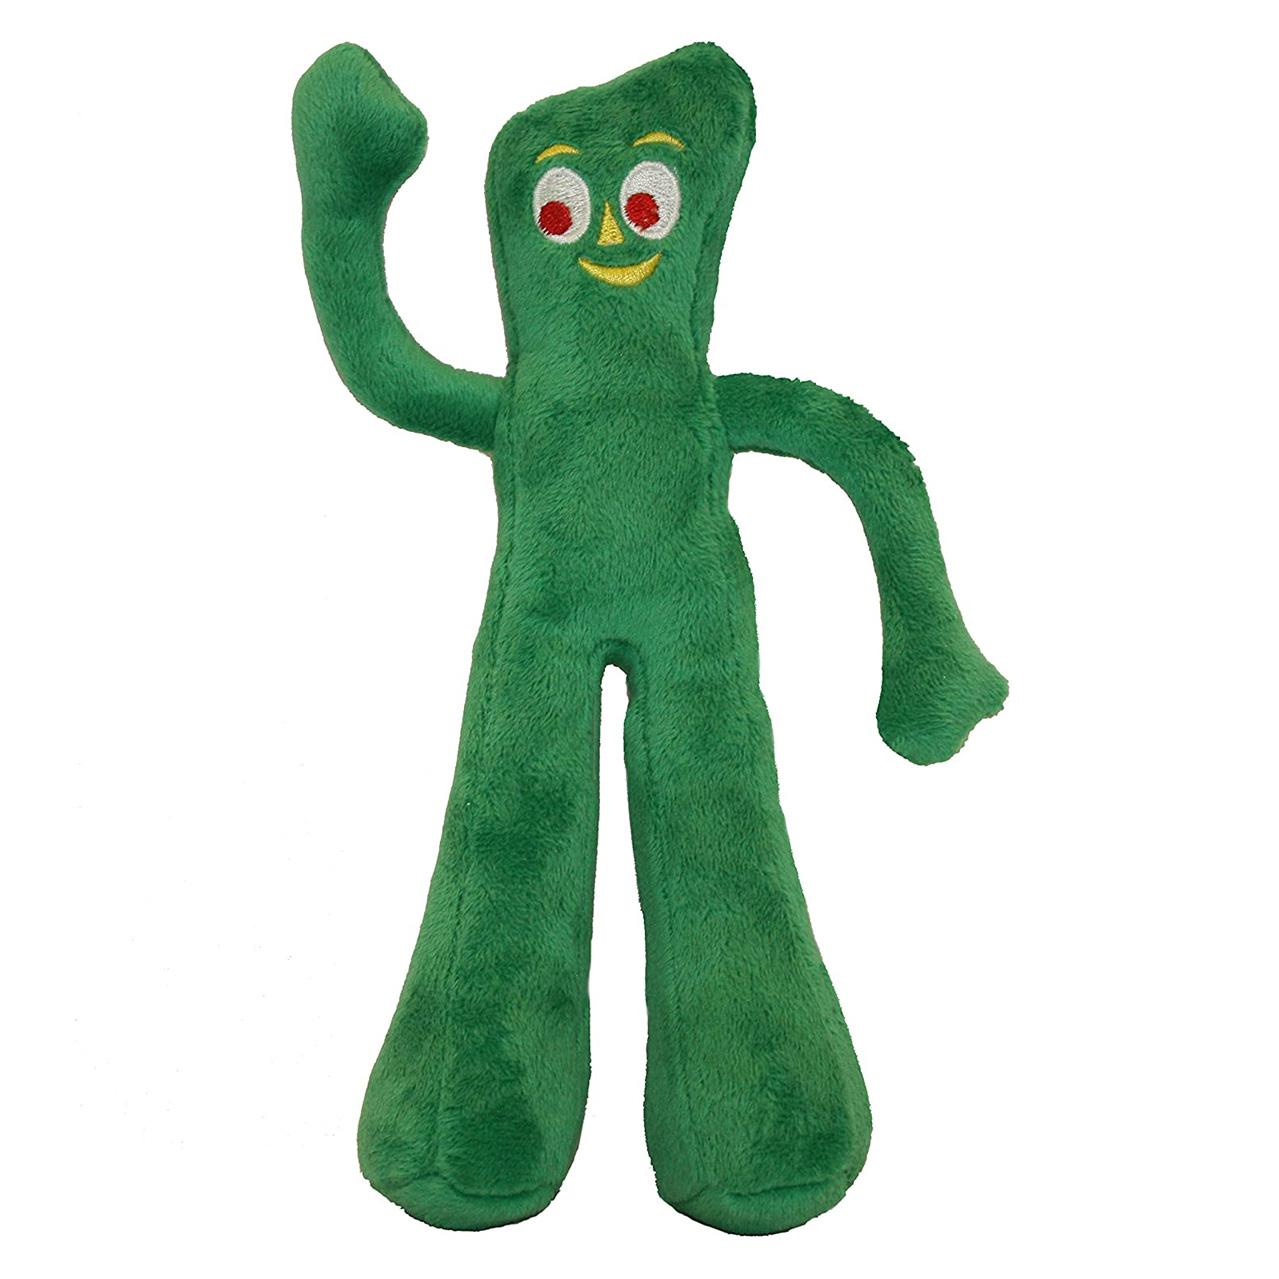 Gumby Plush Filled Dog Toy for $2.99